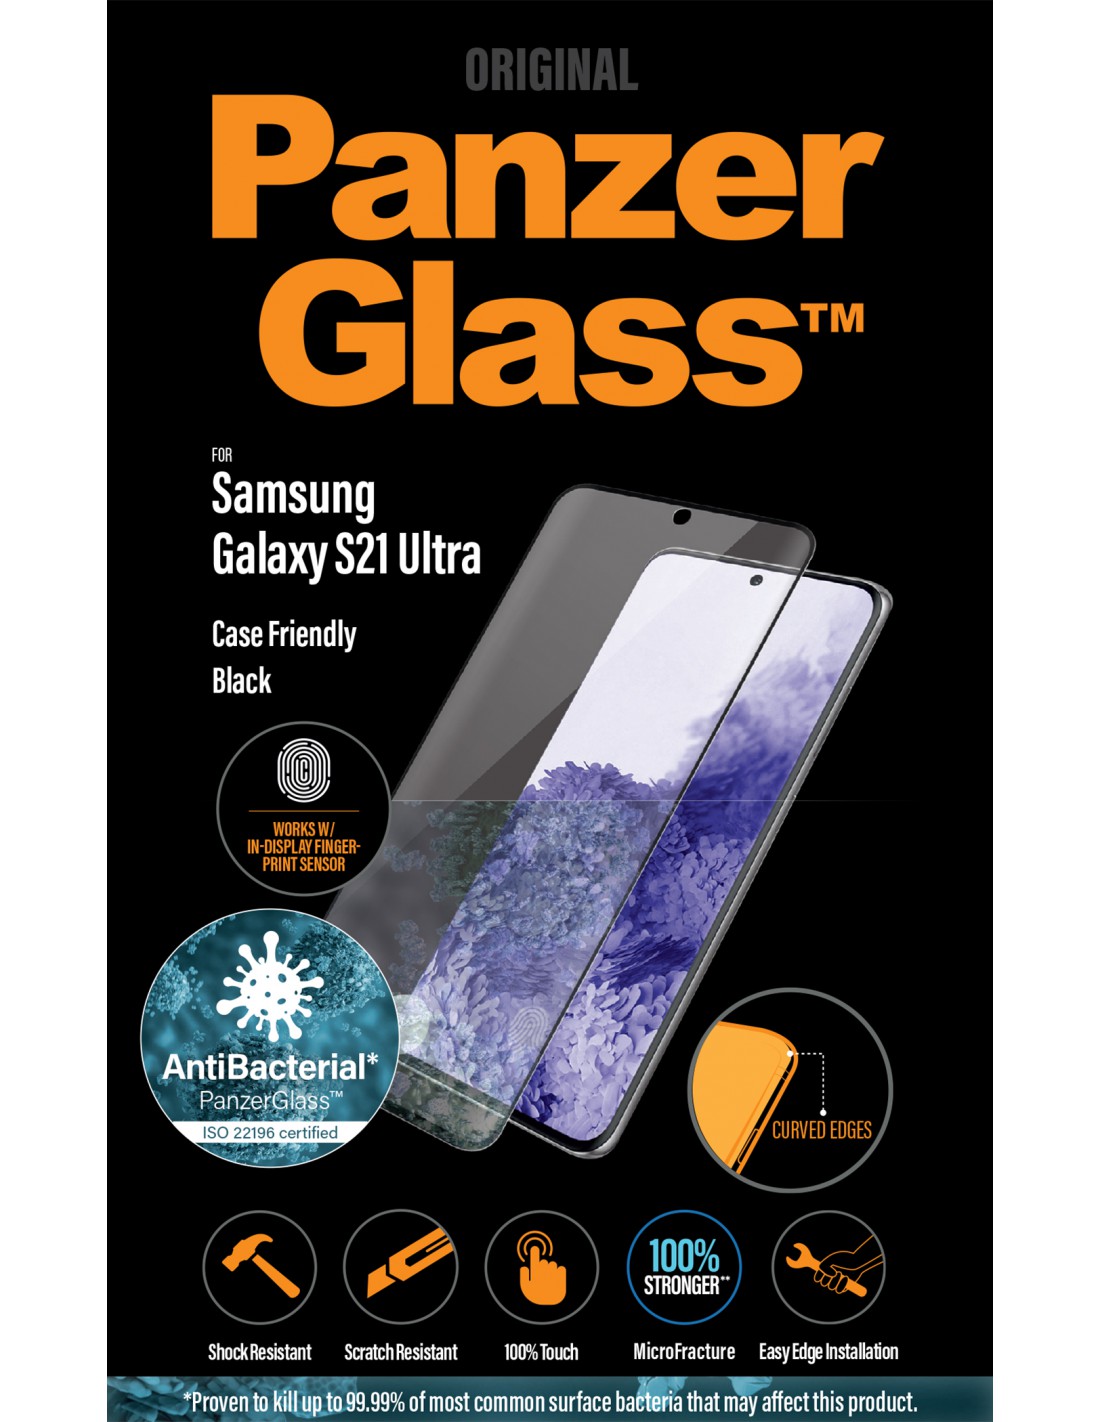 Panzer Glass Screen Protector For Samsung Galaxy S21 Ultra (CASE FRIENDLY)